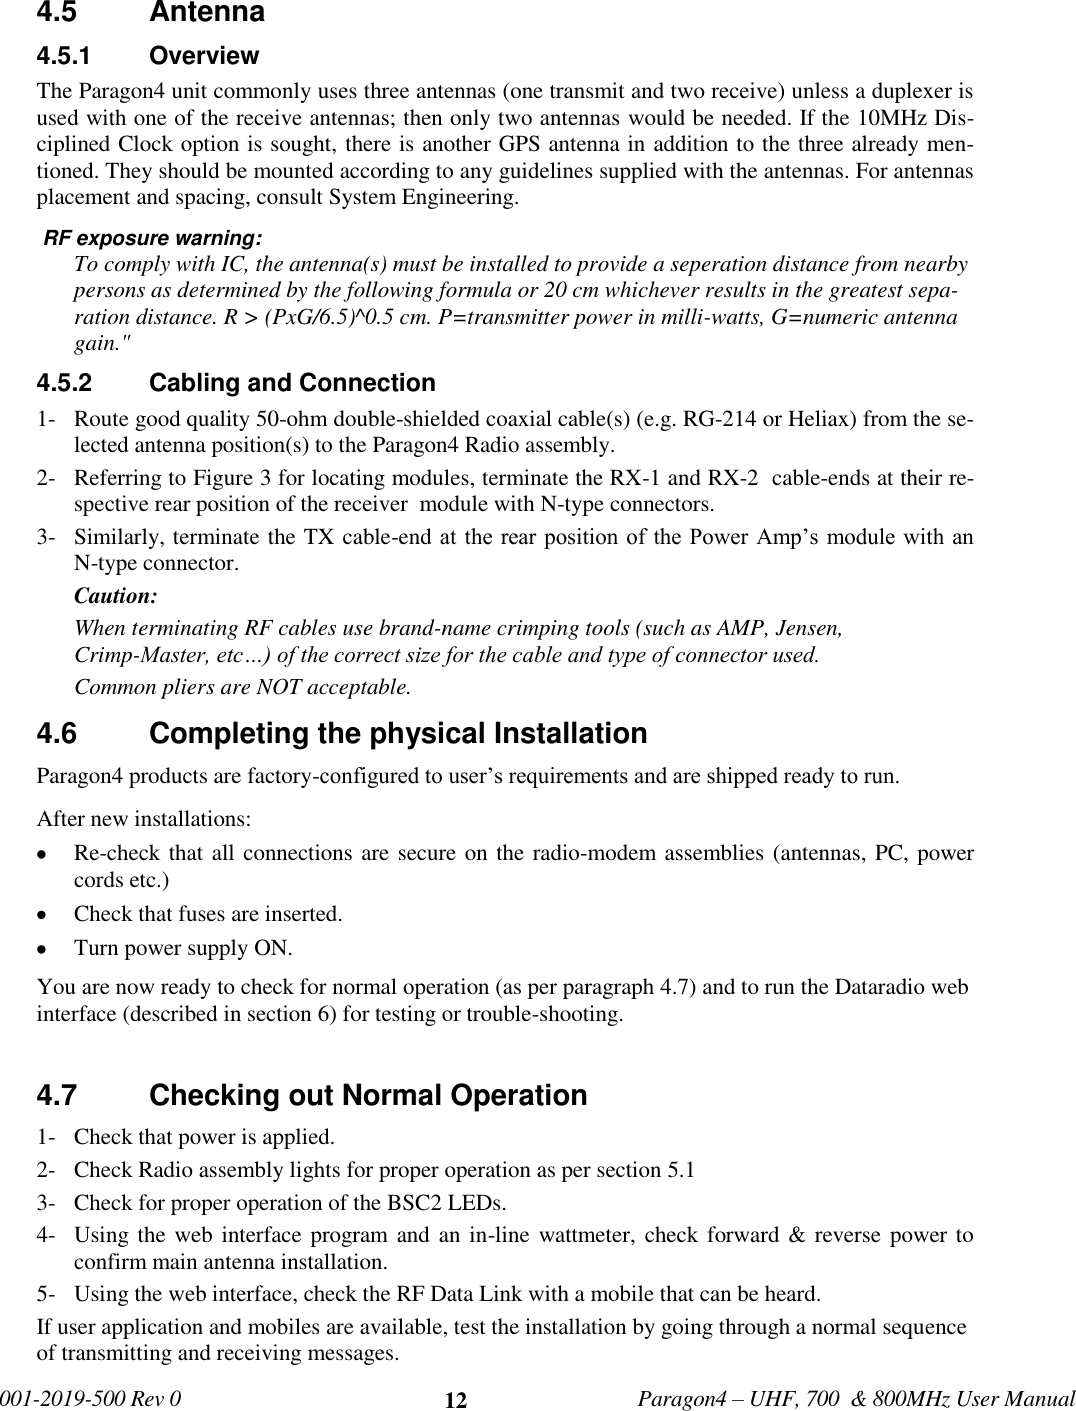   001-2019-500 Rev 0         Paragon4 – UHF, 700  &amp; 800MHz User Manual     12 4.5  Antenna 4.5.1  Overview The Paragon4 unit commonly uses three antennas (one transmit and two receive) unless a duplexer is used with one of the receive antennas; then only two antennas would be needed. If the 10MHz Dis-ciplined Clock option is sought, there is another GPS antenna in addition to the three already men-tioned. They should be mounted according to any guidelines supplied with the antennas. For antennas placement and spacing, consult System Engineering.   RF exposure warning: To comply with IC, the antenna(s) must be installed to provide a seperation distance from nearby persons as determined by the following formula or 20 cm whichever results in the greatest sepa-ration distance. R &gt; (PxG/6.5)^0.5 cm. P=transmitter power in milli-watts, G=numeric antenna gain.&quot; 4.5.2  Cabling and Connection 1- Route good quality 50-ohm double-shielded coaxial cable(s) (e.g. RG-214 or Heliax) from the se-lected antenna position(s) to the Paragon4 Radio assembly. 2- Referring to Figure 3 for locating modules, terminate the RX-1 and RX-2  cable-ends at their re-spective rear position of the receiver  module with N-type connectors. 3- Similarly, terminate the TX cable-end at  the rear position of the Power Amp’s module with an N-type connector. Caution:  When terminating RF cables use brand-name crimping tools (such as AMP, Jensen, Crimp-Master, etc…) of the correct size for the cable and type of connector used. Common pliers are NOT acceptable. 4.6  Completing the physical Installation Paragon4 products are factory-configured to user’s requirements and are shipped ready to run.  After new installations:  Re-check that all connections are secure on the radio-modem assemblies (antennas, PC, power cords etc.)  Check that fuses are inserted.  Turn power supply ON. You are now ready to check for normal operation (as per paragraph 4.7) and to run the Dataradio web interface (described in section 6) for testing or trouble-shooting.   4.7  Checking out Normal Operation 1- Check that power is applied. 2- Check Radio assembly lights for proper operation as per section 5.1 3- Check for proper operation of the BSC2 LEDs. 4- Using the web interface  program and an in-line wattmeter,  check forward &amp; reverse power to confirm main antenna installation. 5- Using the web interface, check the RF Data Link with a mobile that can be heard. If user application and mobiles are available, test the installation by going through a normal sequence of transmitting and receiving messages. 